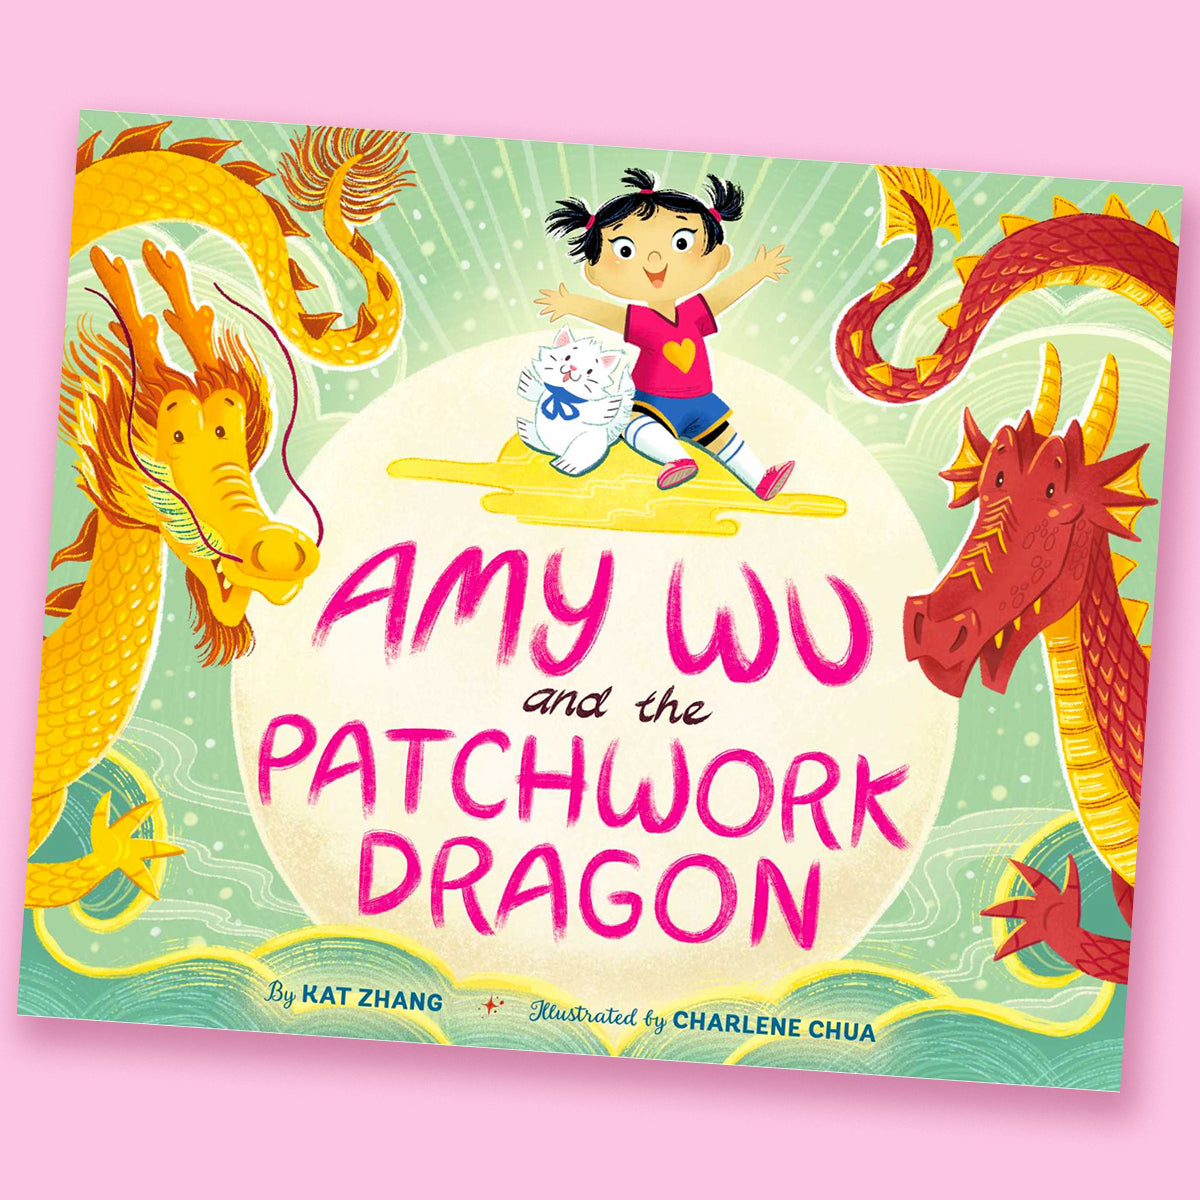 Amy Wu and the Patchwork Dragon by Kat Zhang and Charlene Chua